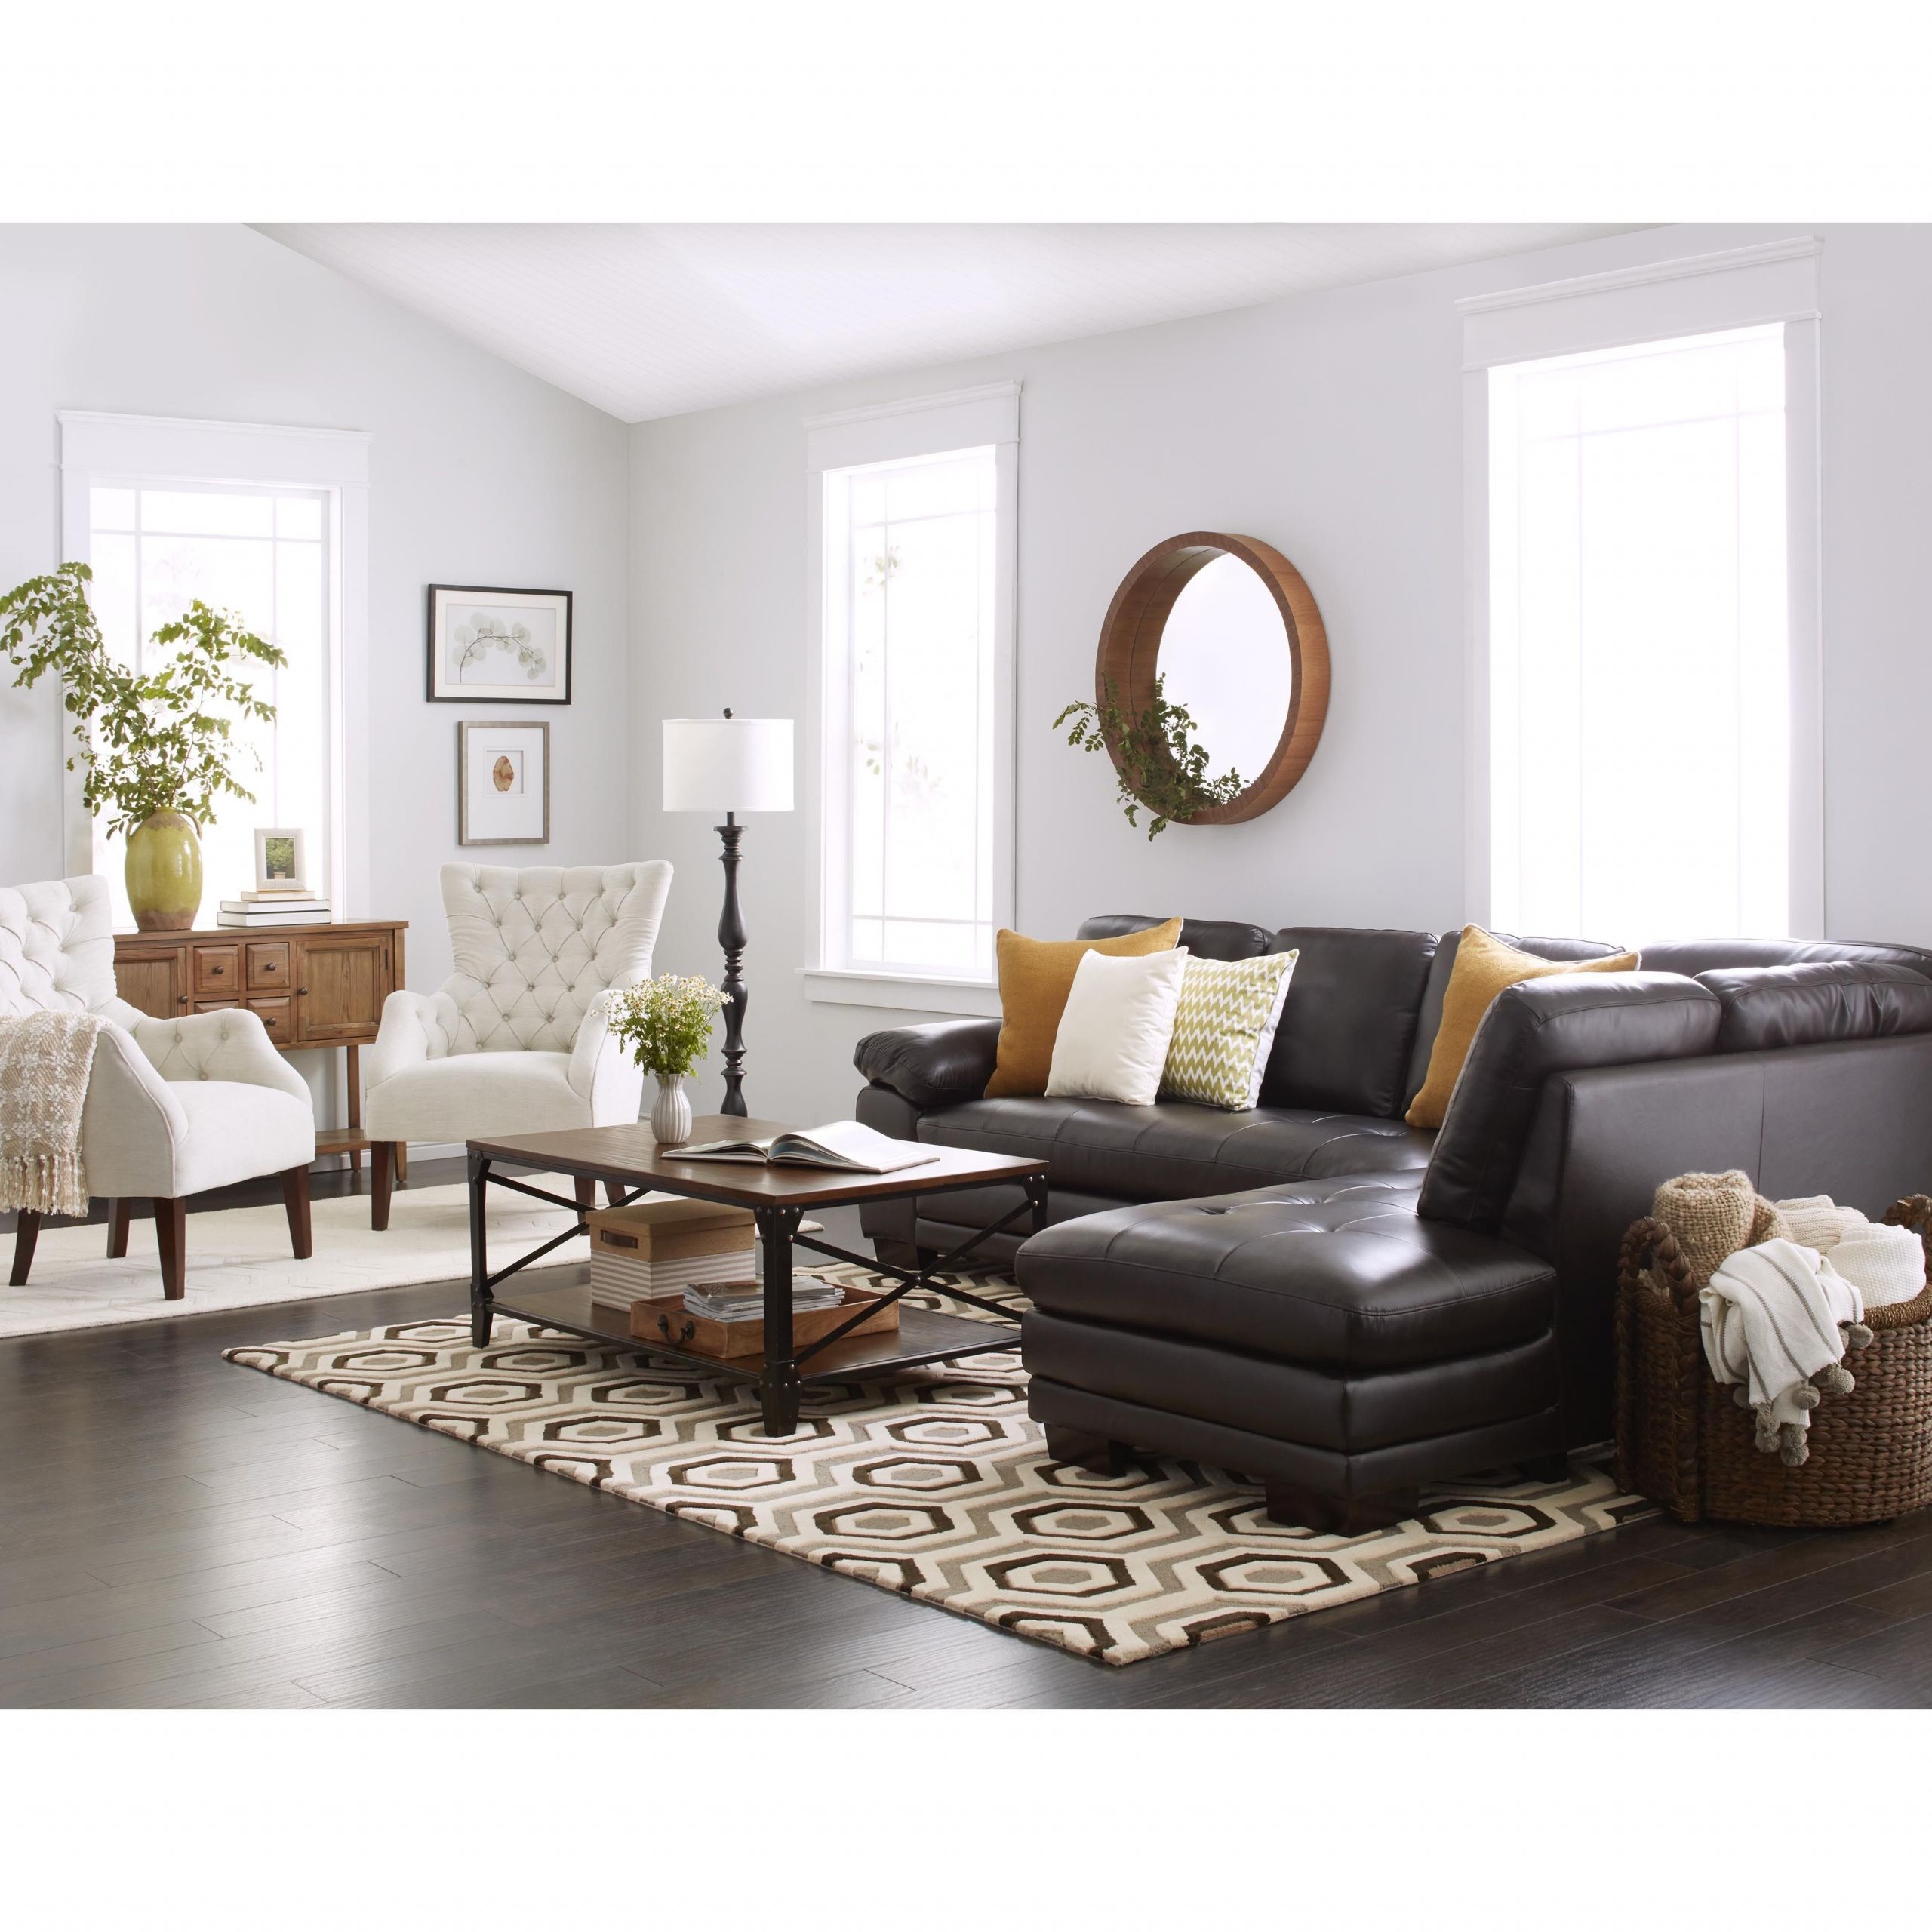 Brown Furniture Living Room Ideas
 Abbyson Devonshire Leather Tufted Sectional in 2019